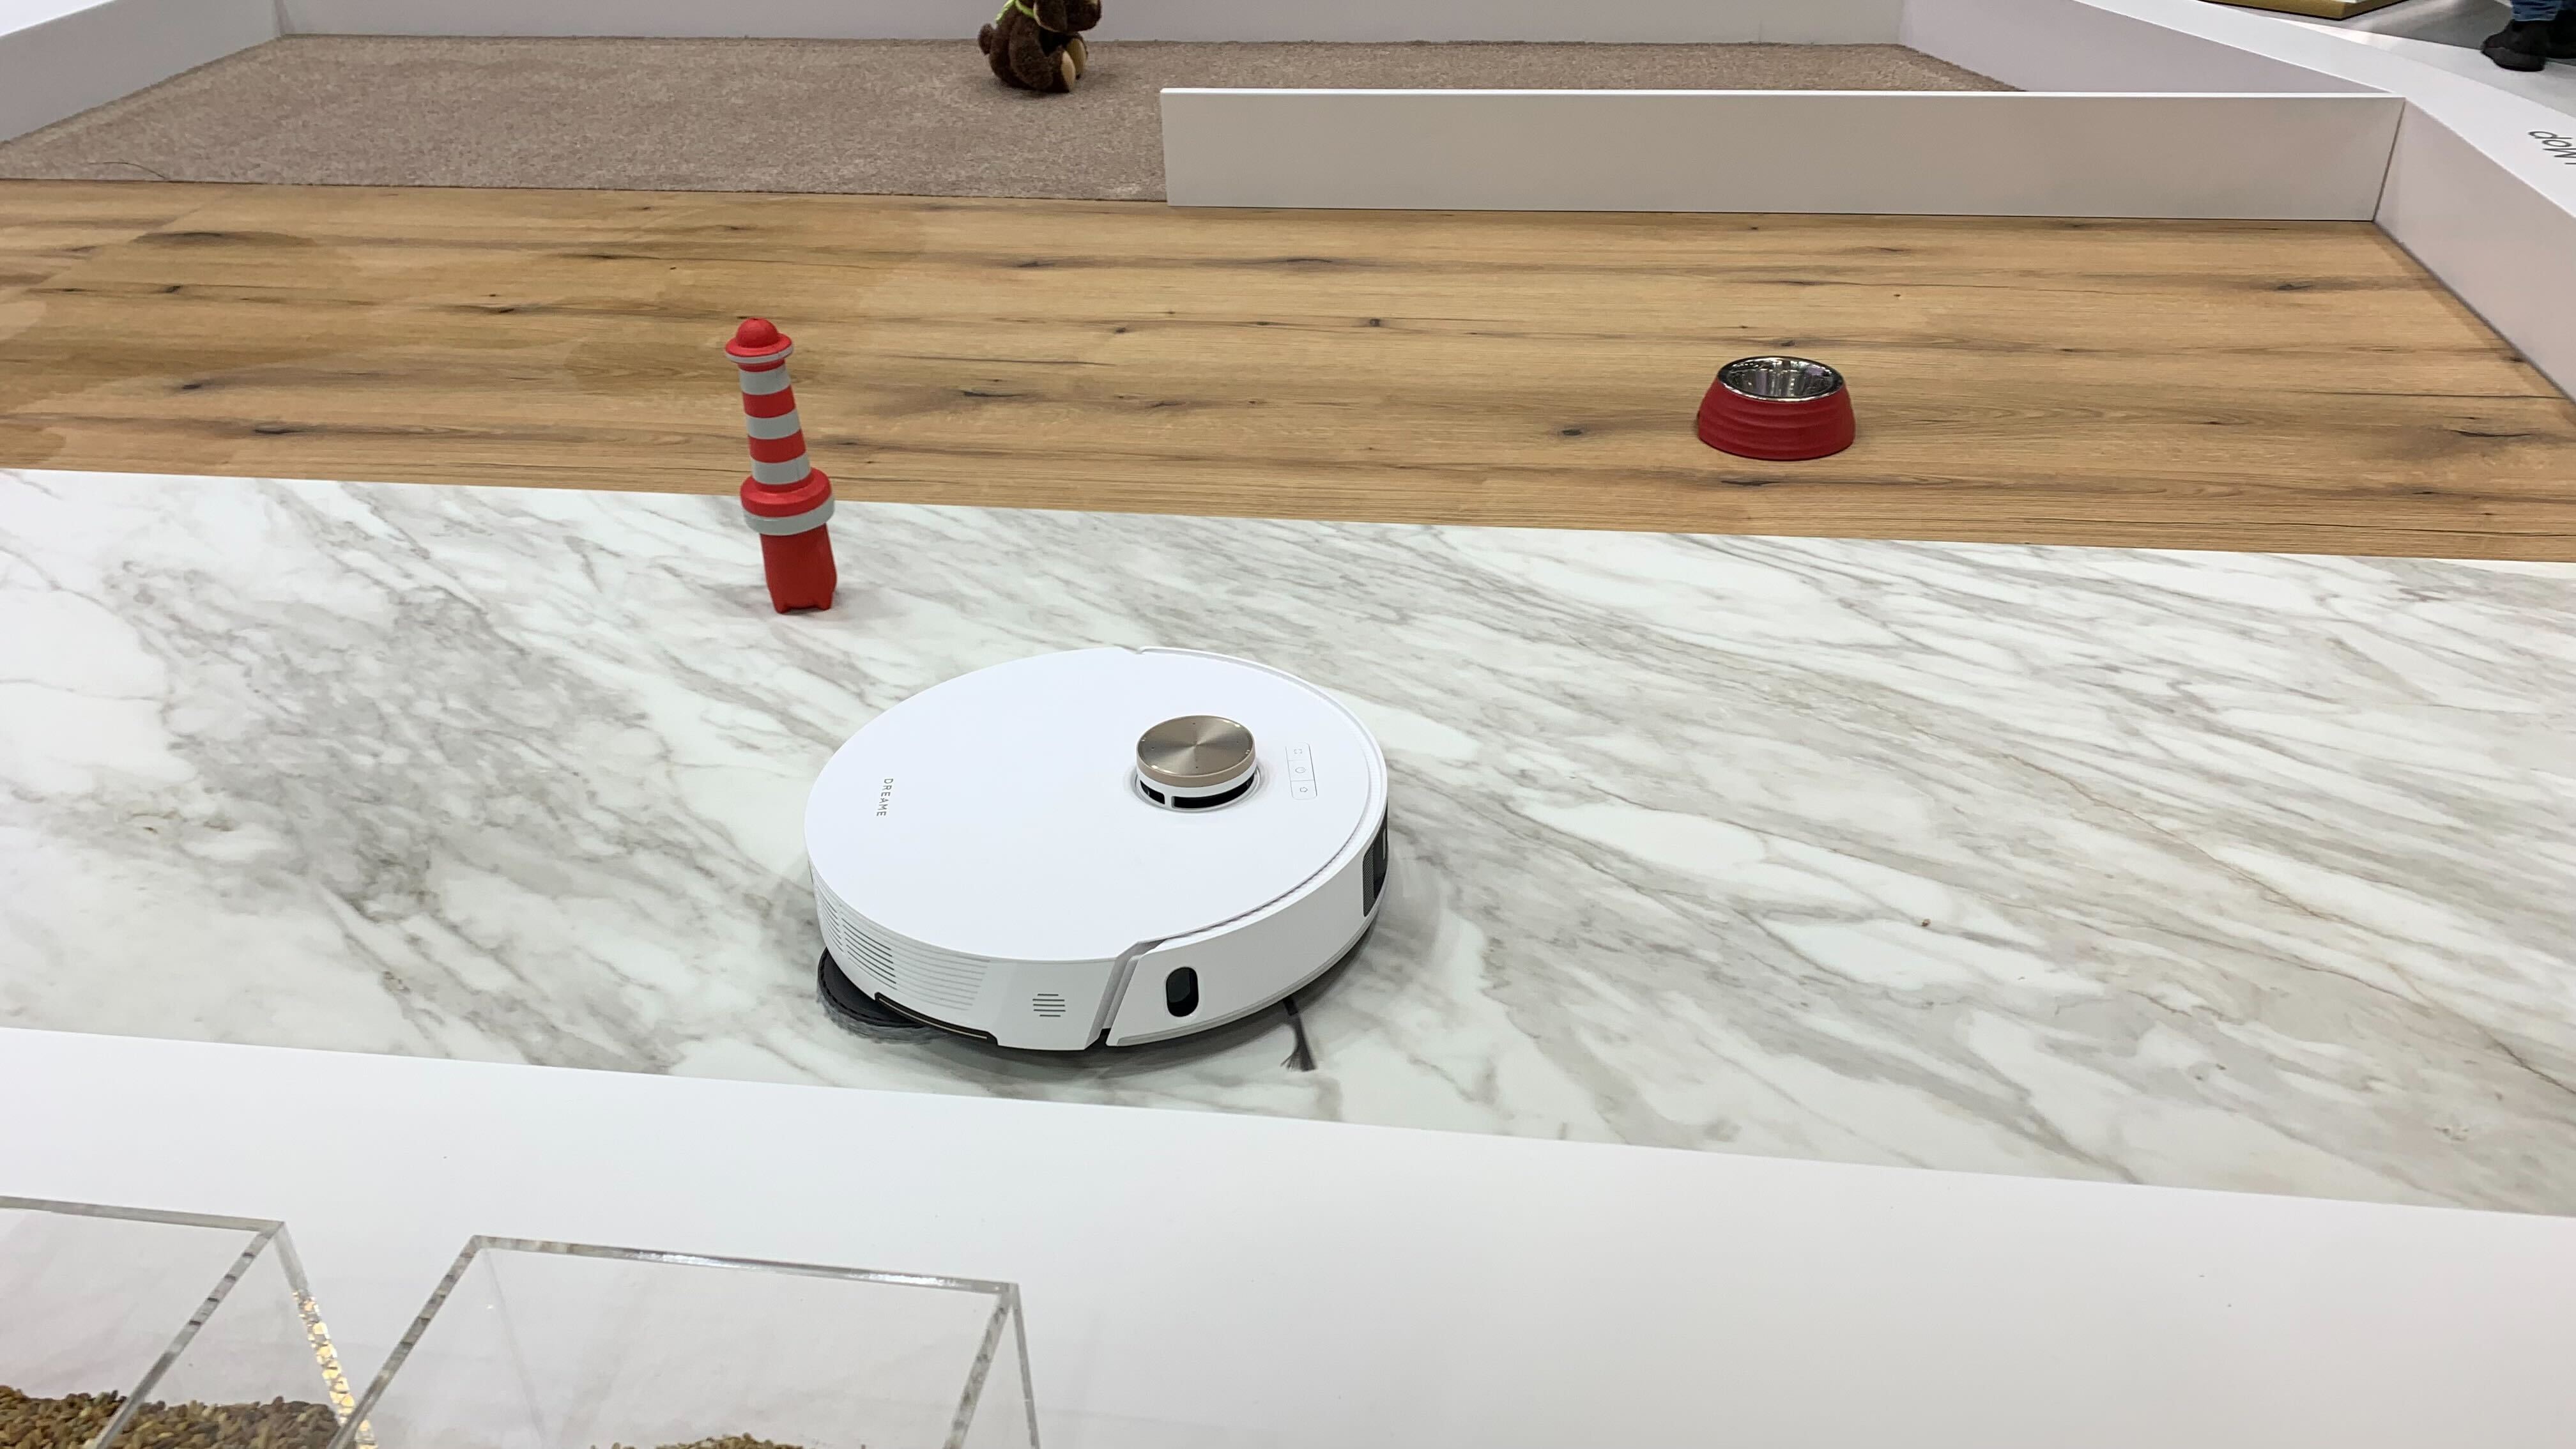 SwitchBot S10: The First Robot Mop That Can Refill And Drain Itself